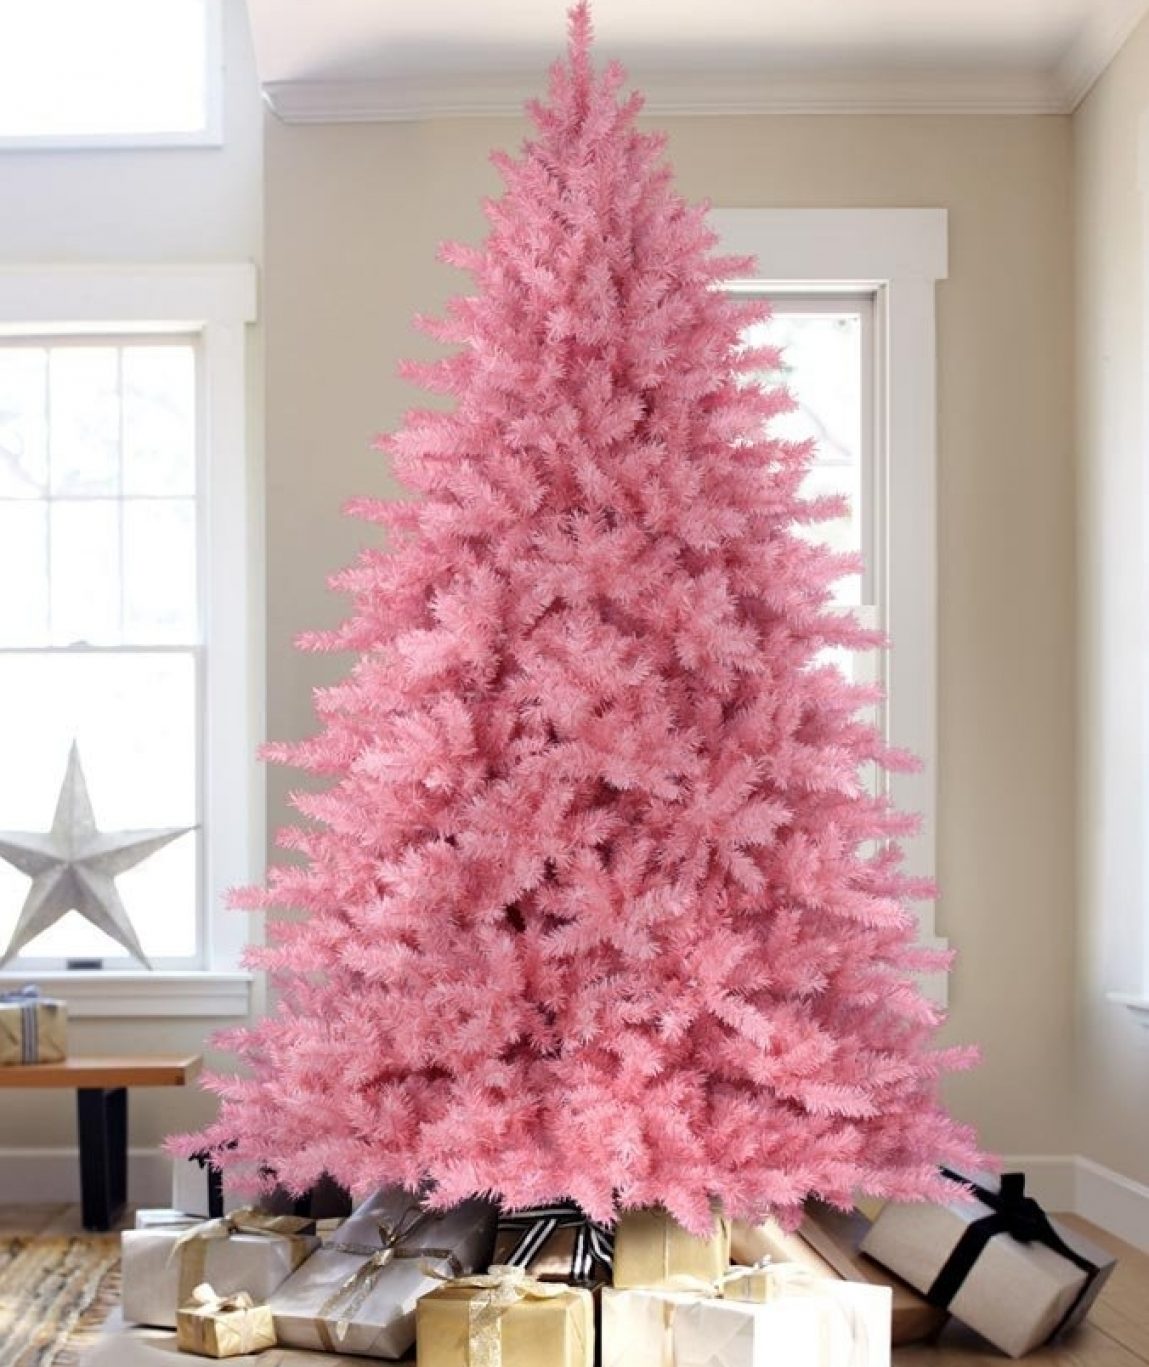 Pretty in Pink Artificial Christmas Tree | Christmas